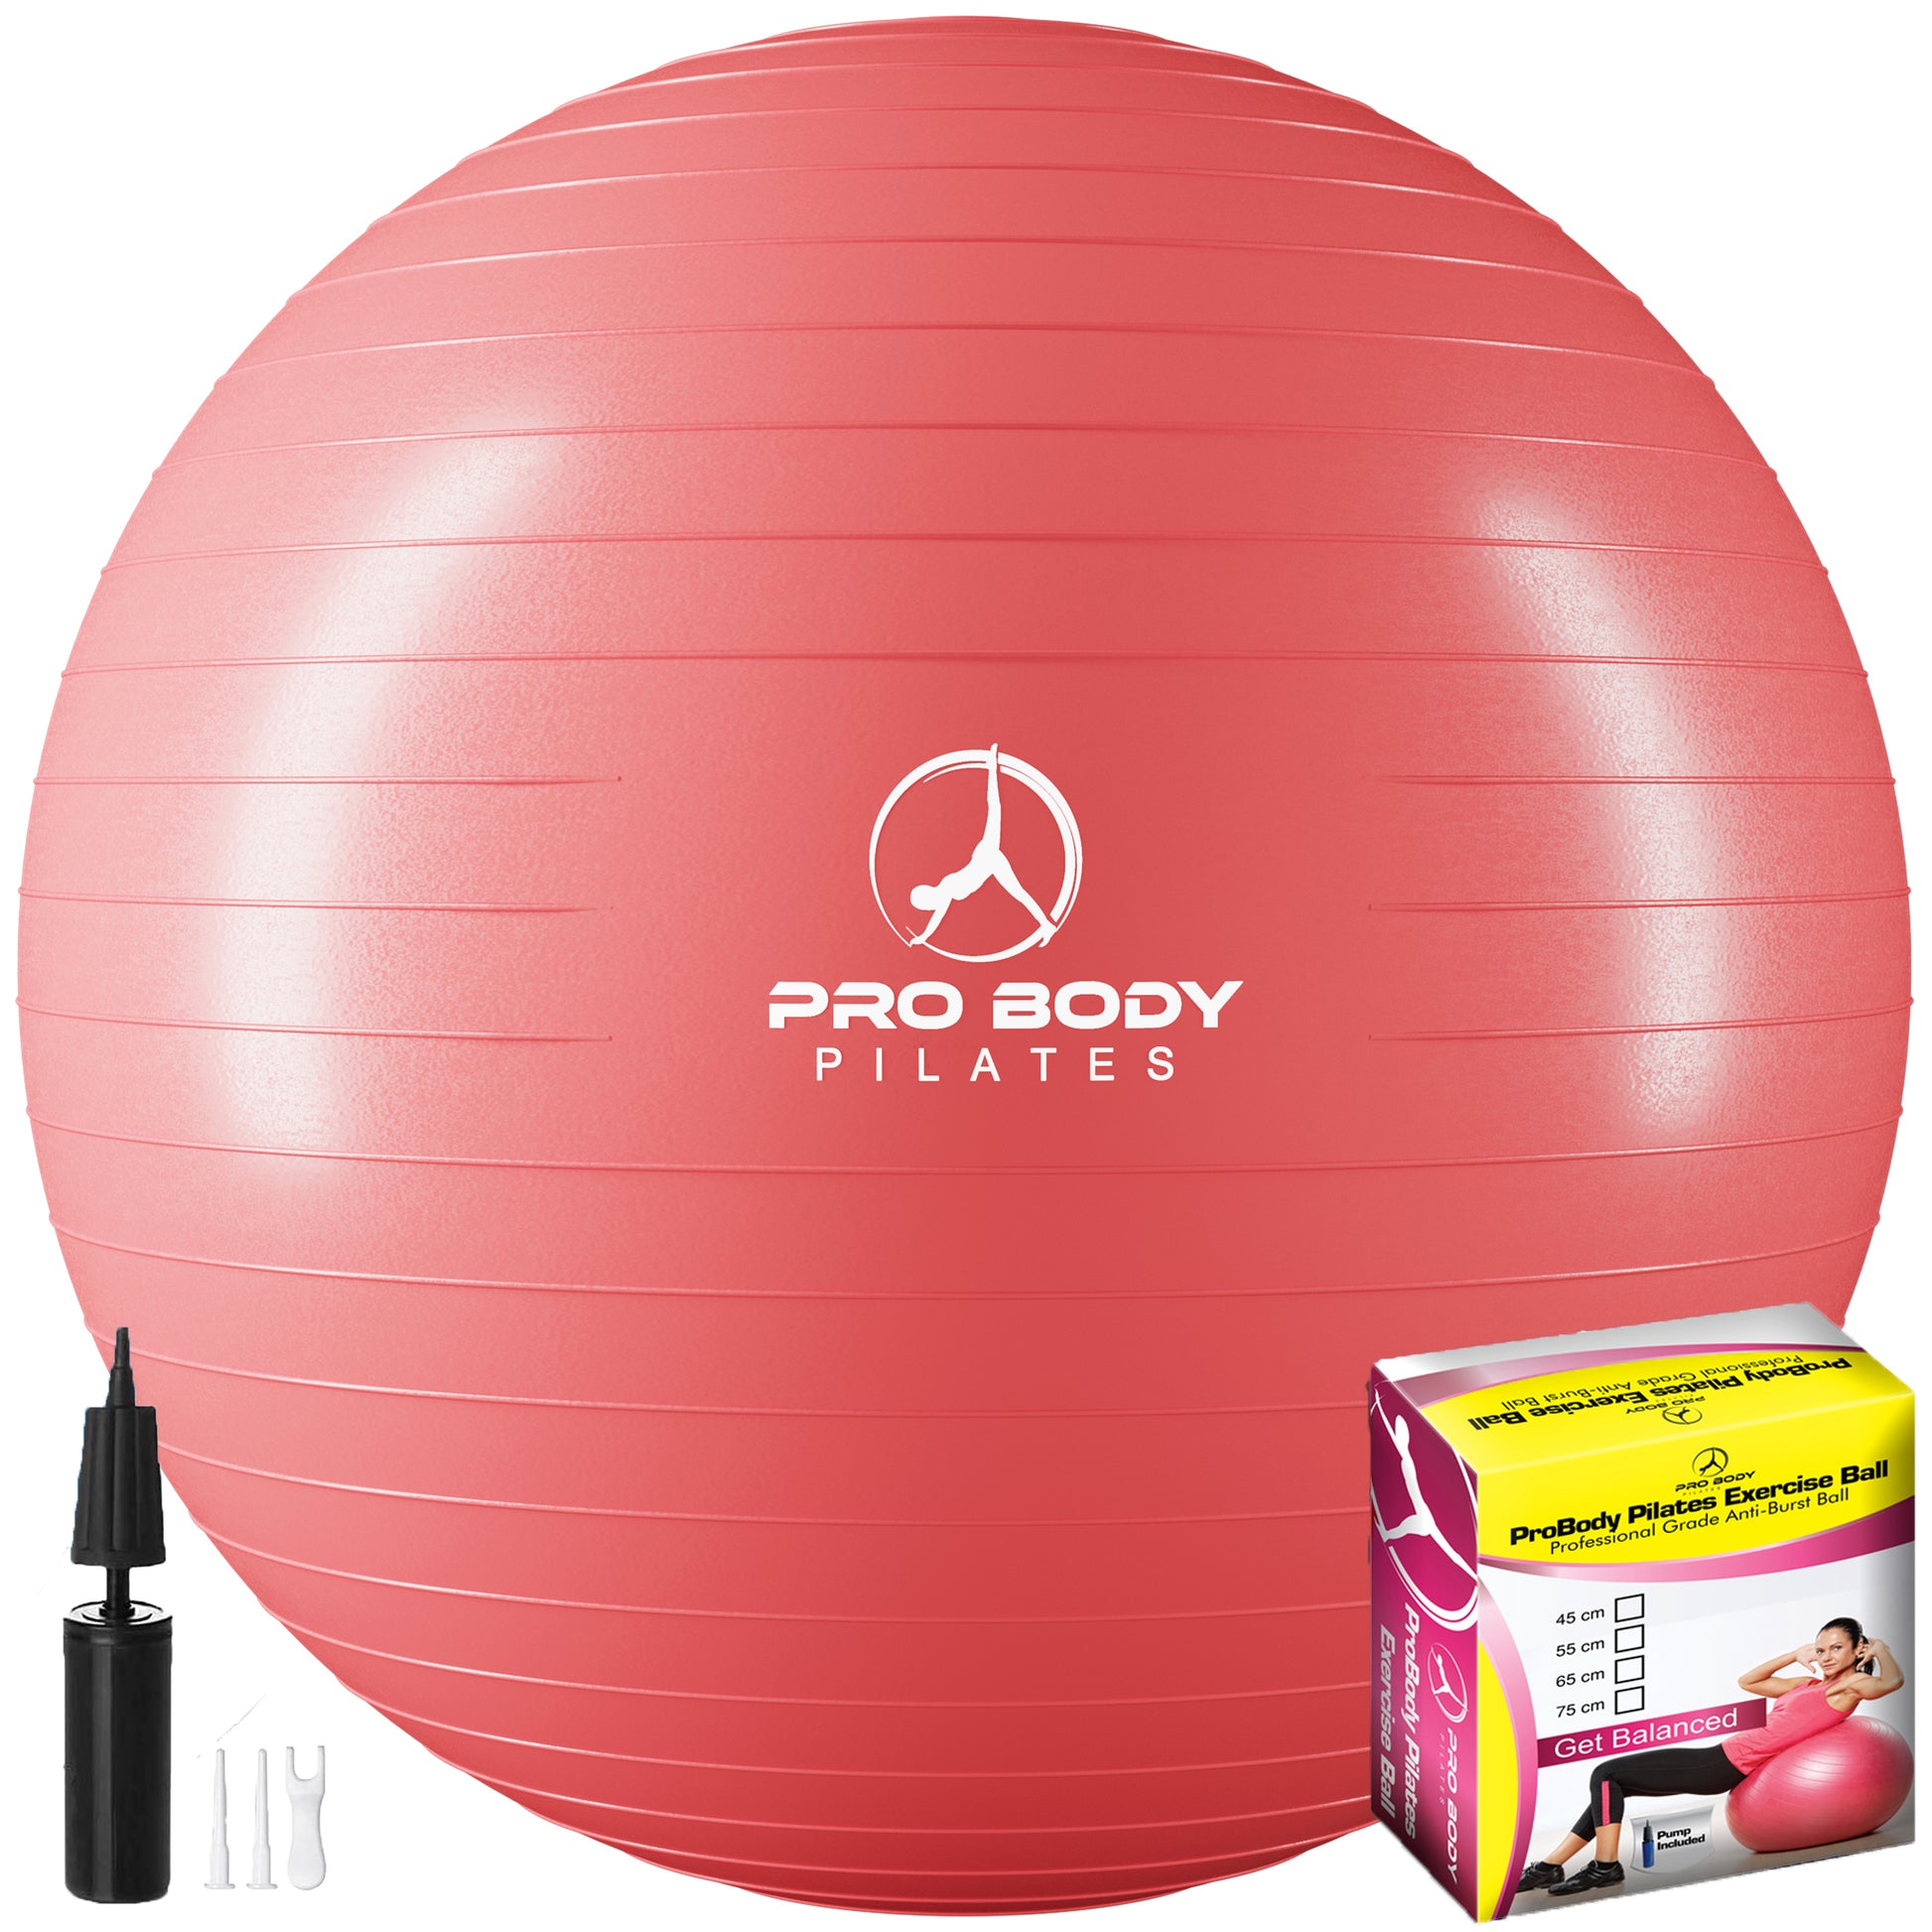 Exercise Ball Professional Grade Anti-Burst Fitness, Balance Ball for  Pilates, Yoga, Birthing, Stability Gym Workout Training and Physical Therapy